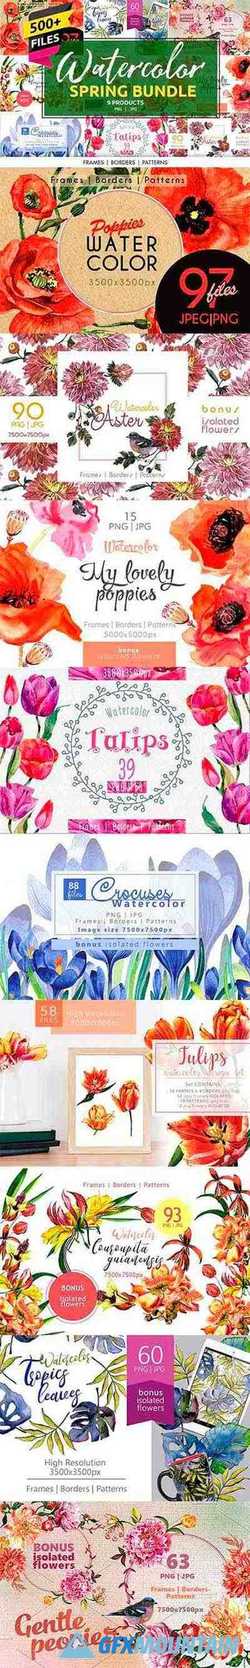 WATERCOLOR SPRING BUNDLE 9 PRODUCTS - 2544252